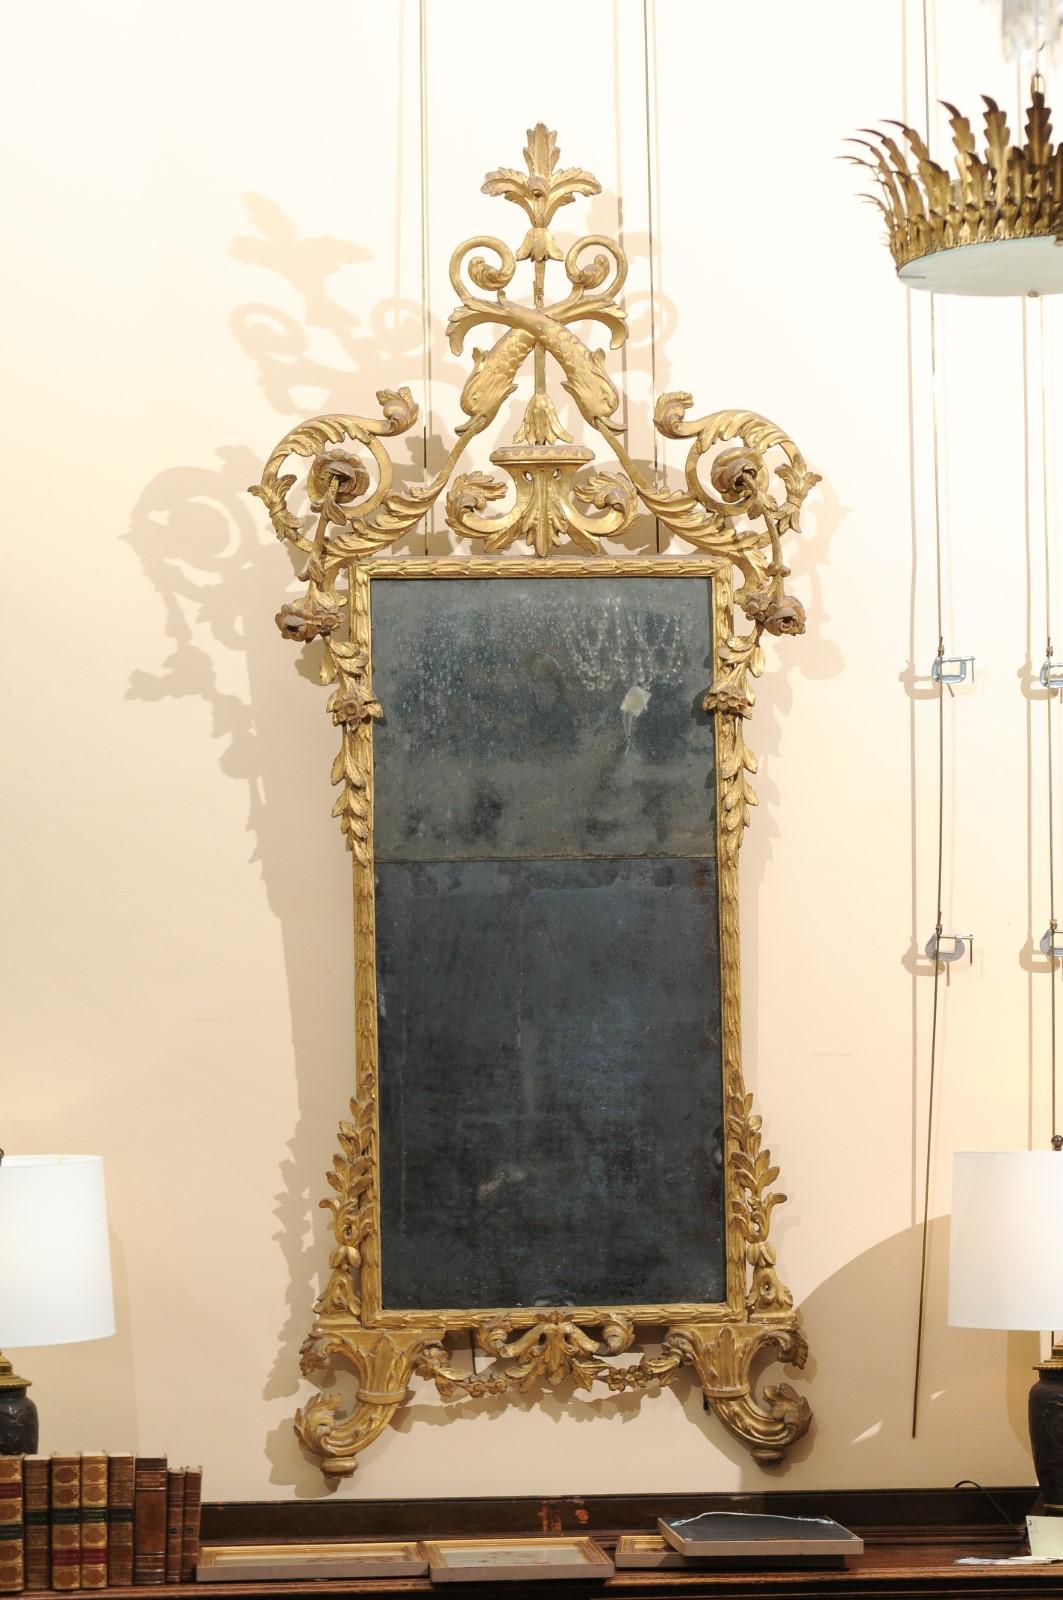 A fine late 18th century Italian neoclassical giltwood mirror with carved crest featuring dolphins, acanthus leaf and rose detail. The mirror with the original 2 piece plate.